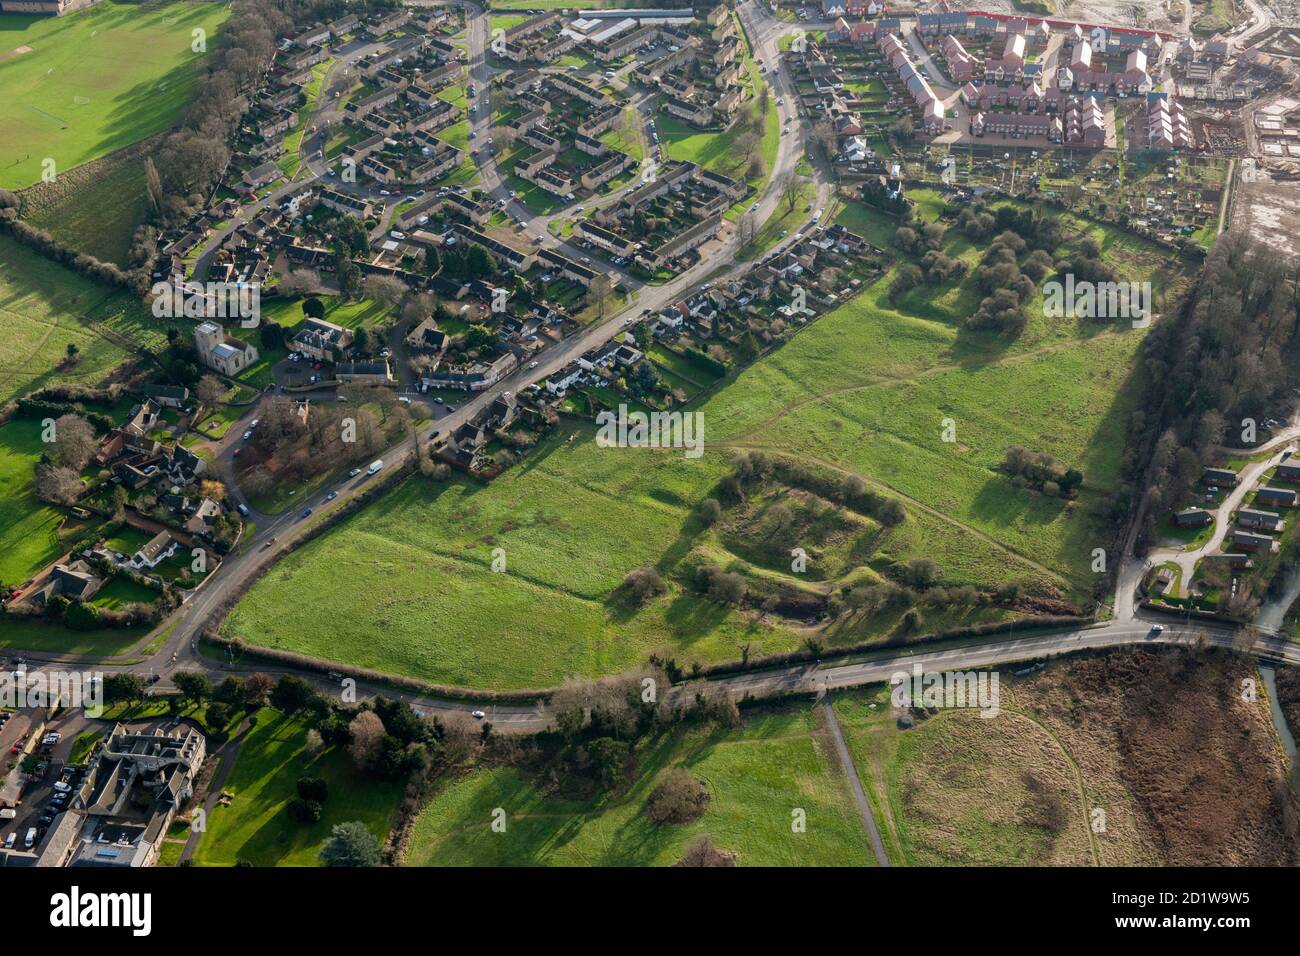 Barton Seagrave moats, fishponds and shrunken medieval village remains, Northamptonshire, 2014. Aerial view. Stock Photo